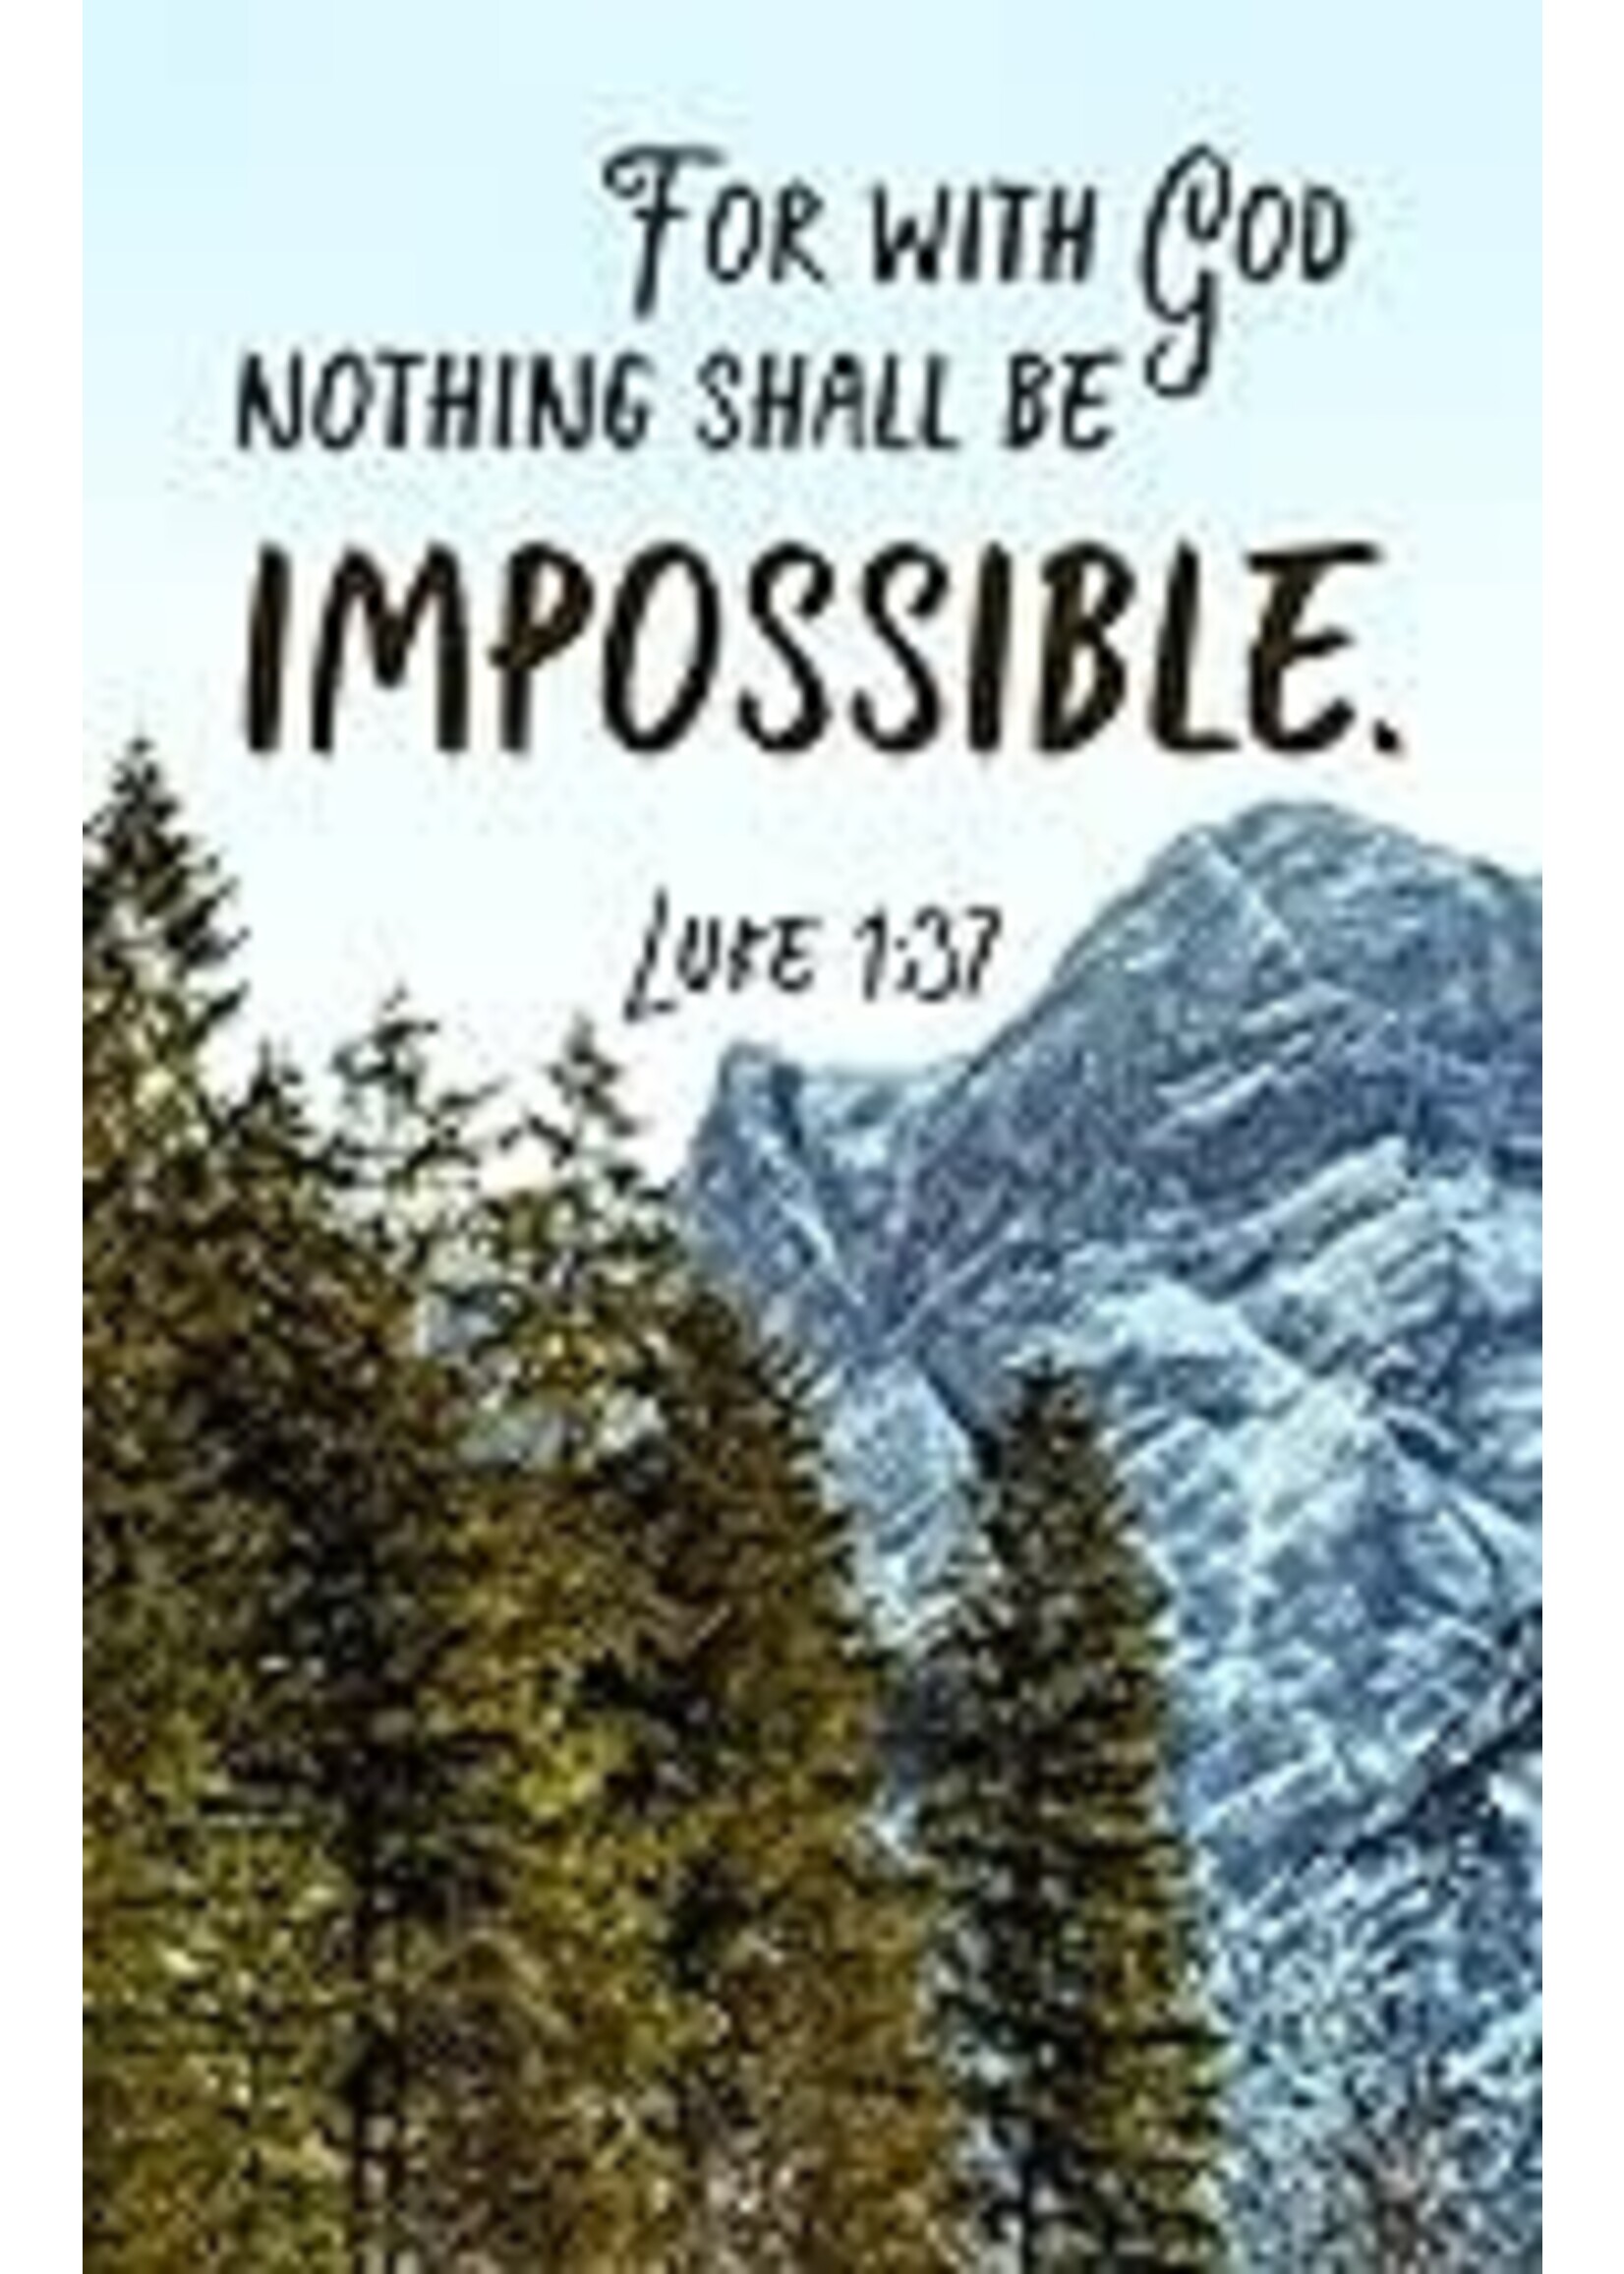 Bulletin-For With God Nothing Shall Be Impossible (Pack Of 100)